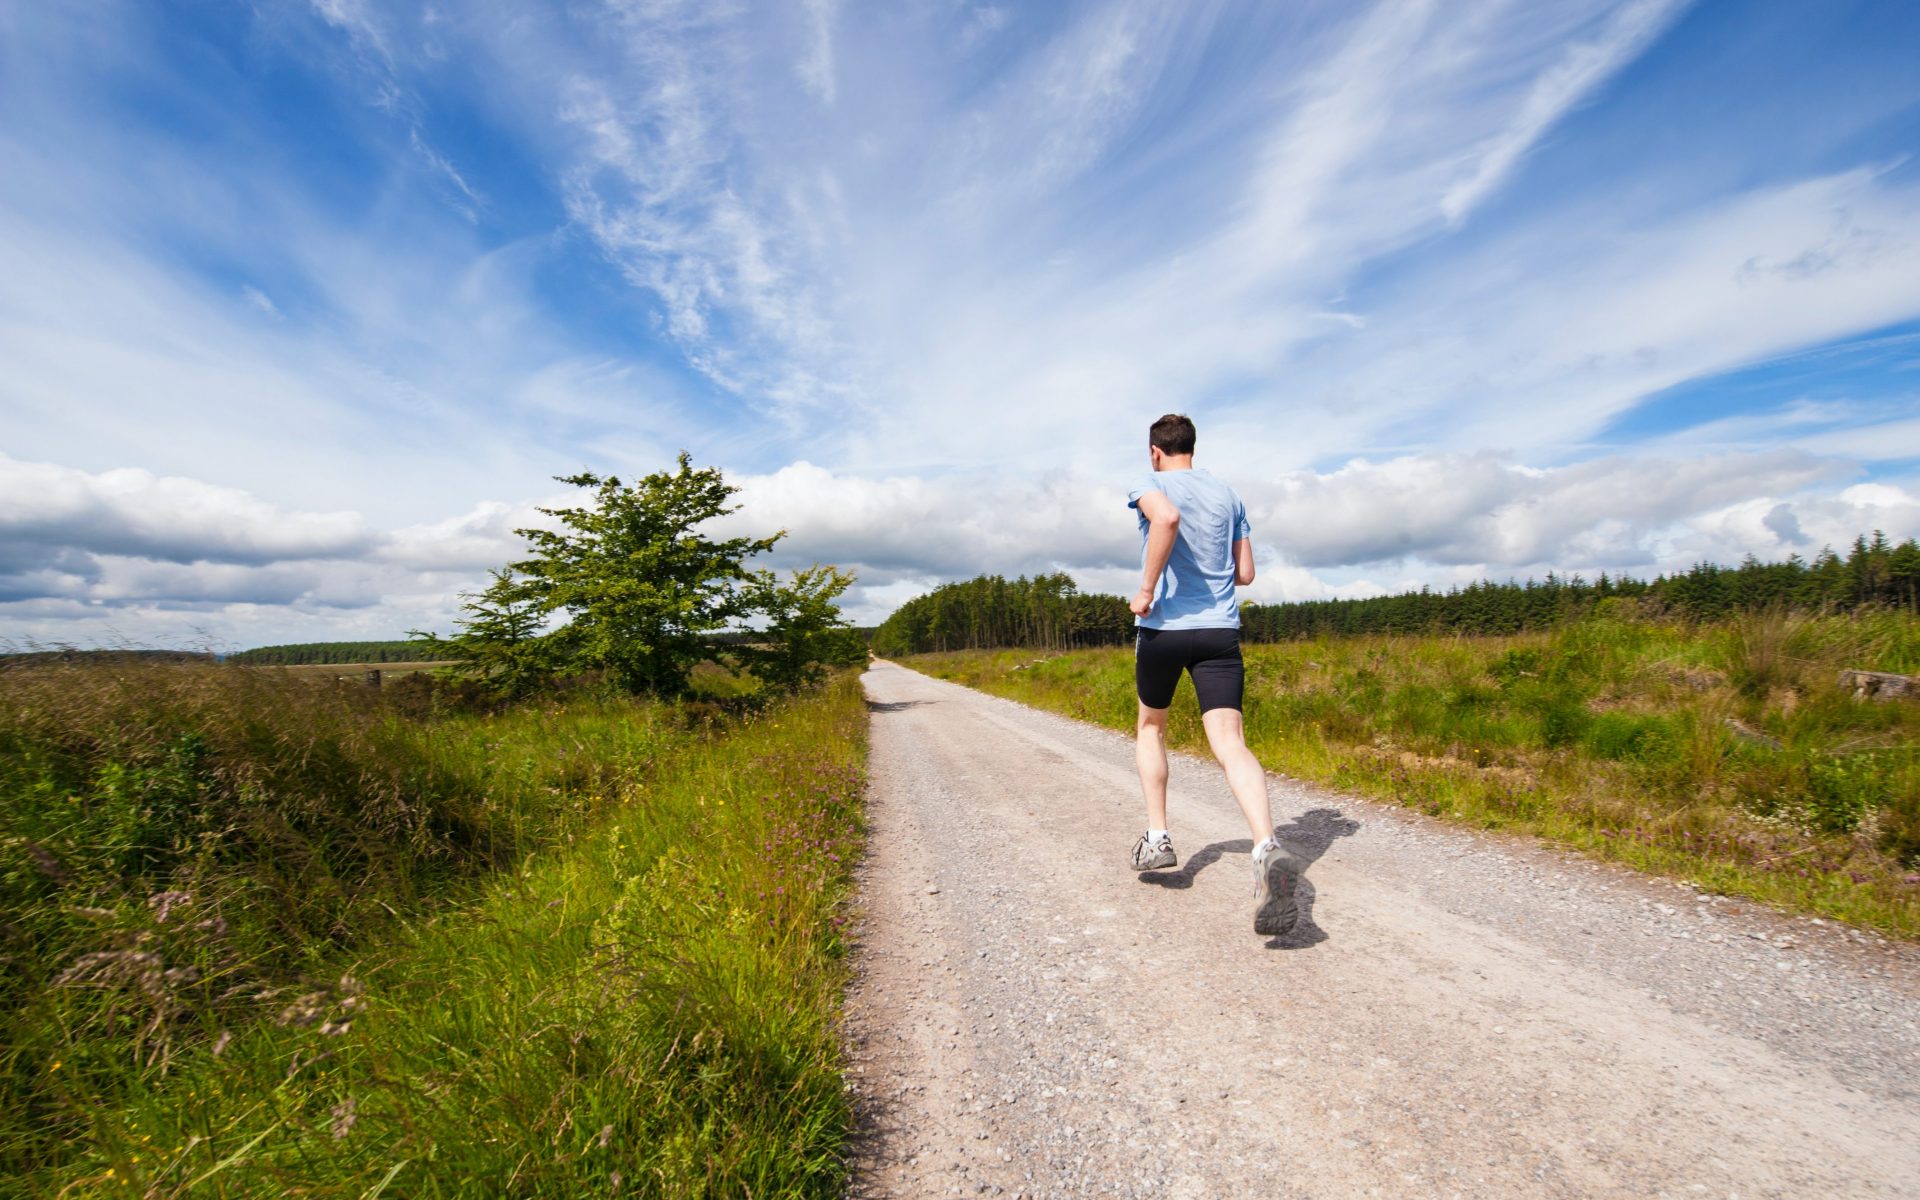 The Achilles tendon is often overexerted while running and the resulting inflammation (achillodynia) is common. Unfortunately, if it becomes chronic, the condition can be protracted...